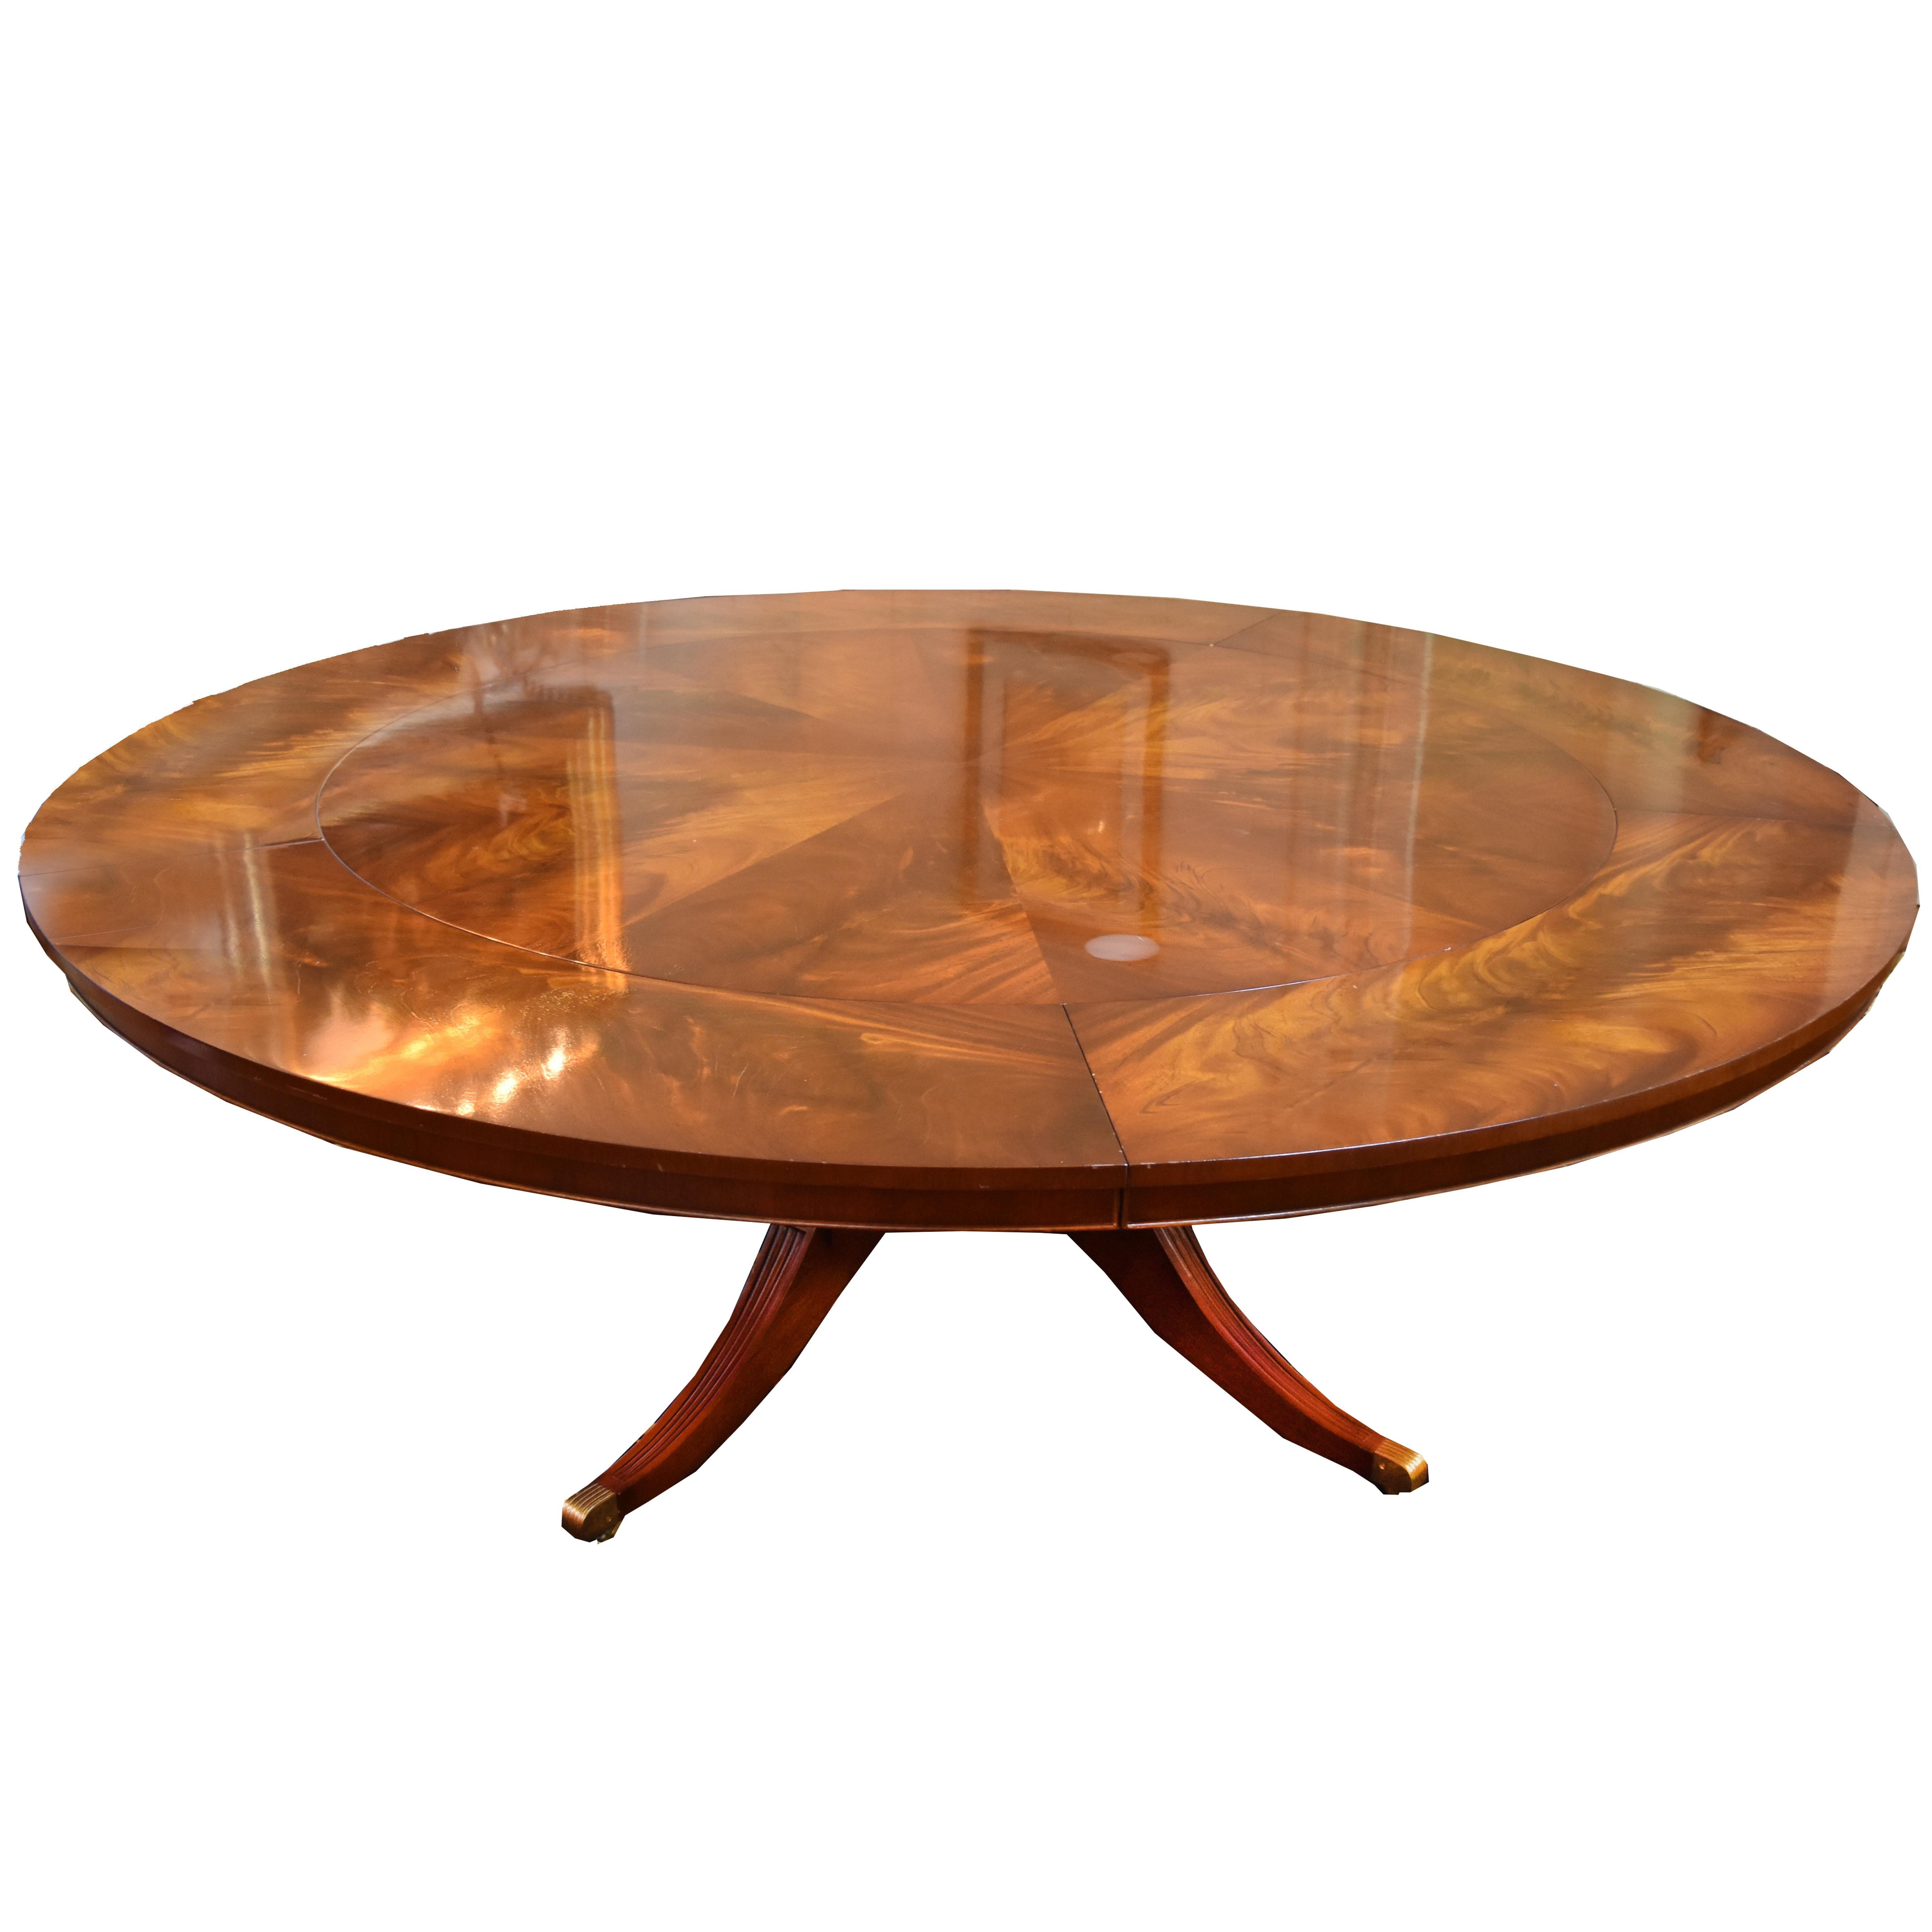 Flame Mahogany Round Pedestal Base Dining Table For Sale